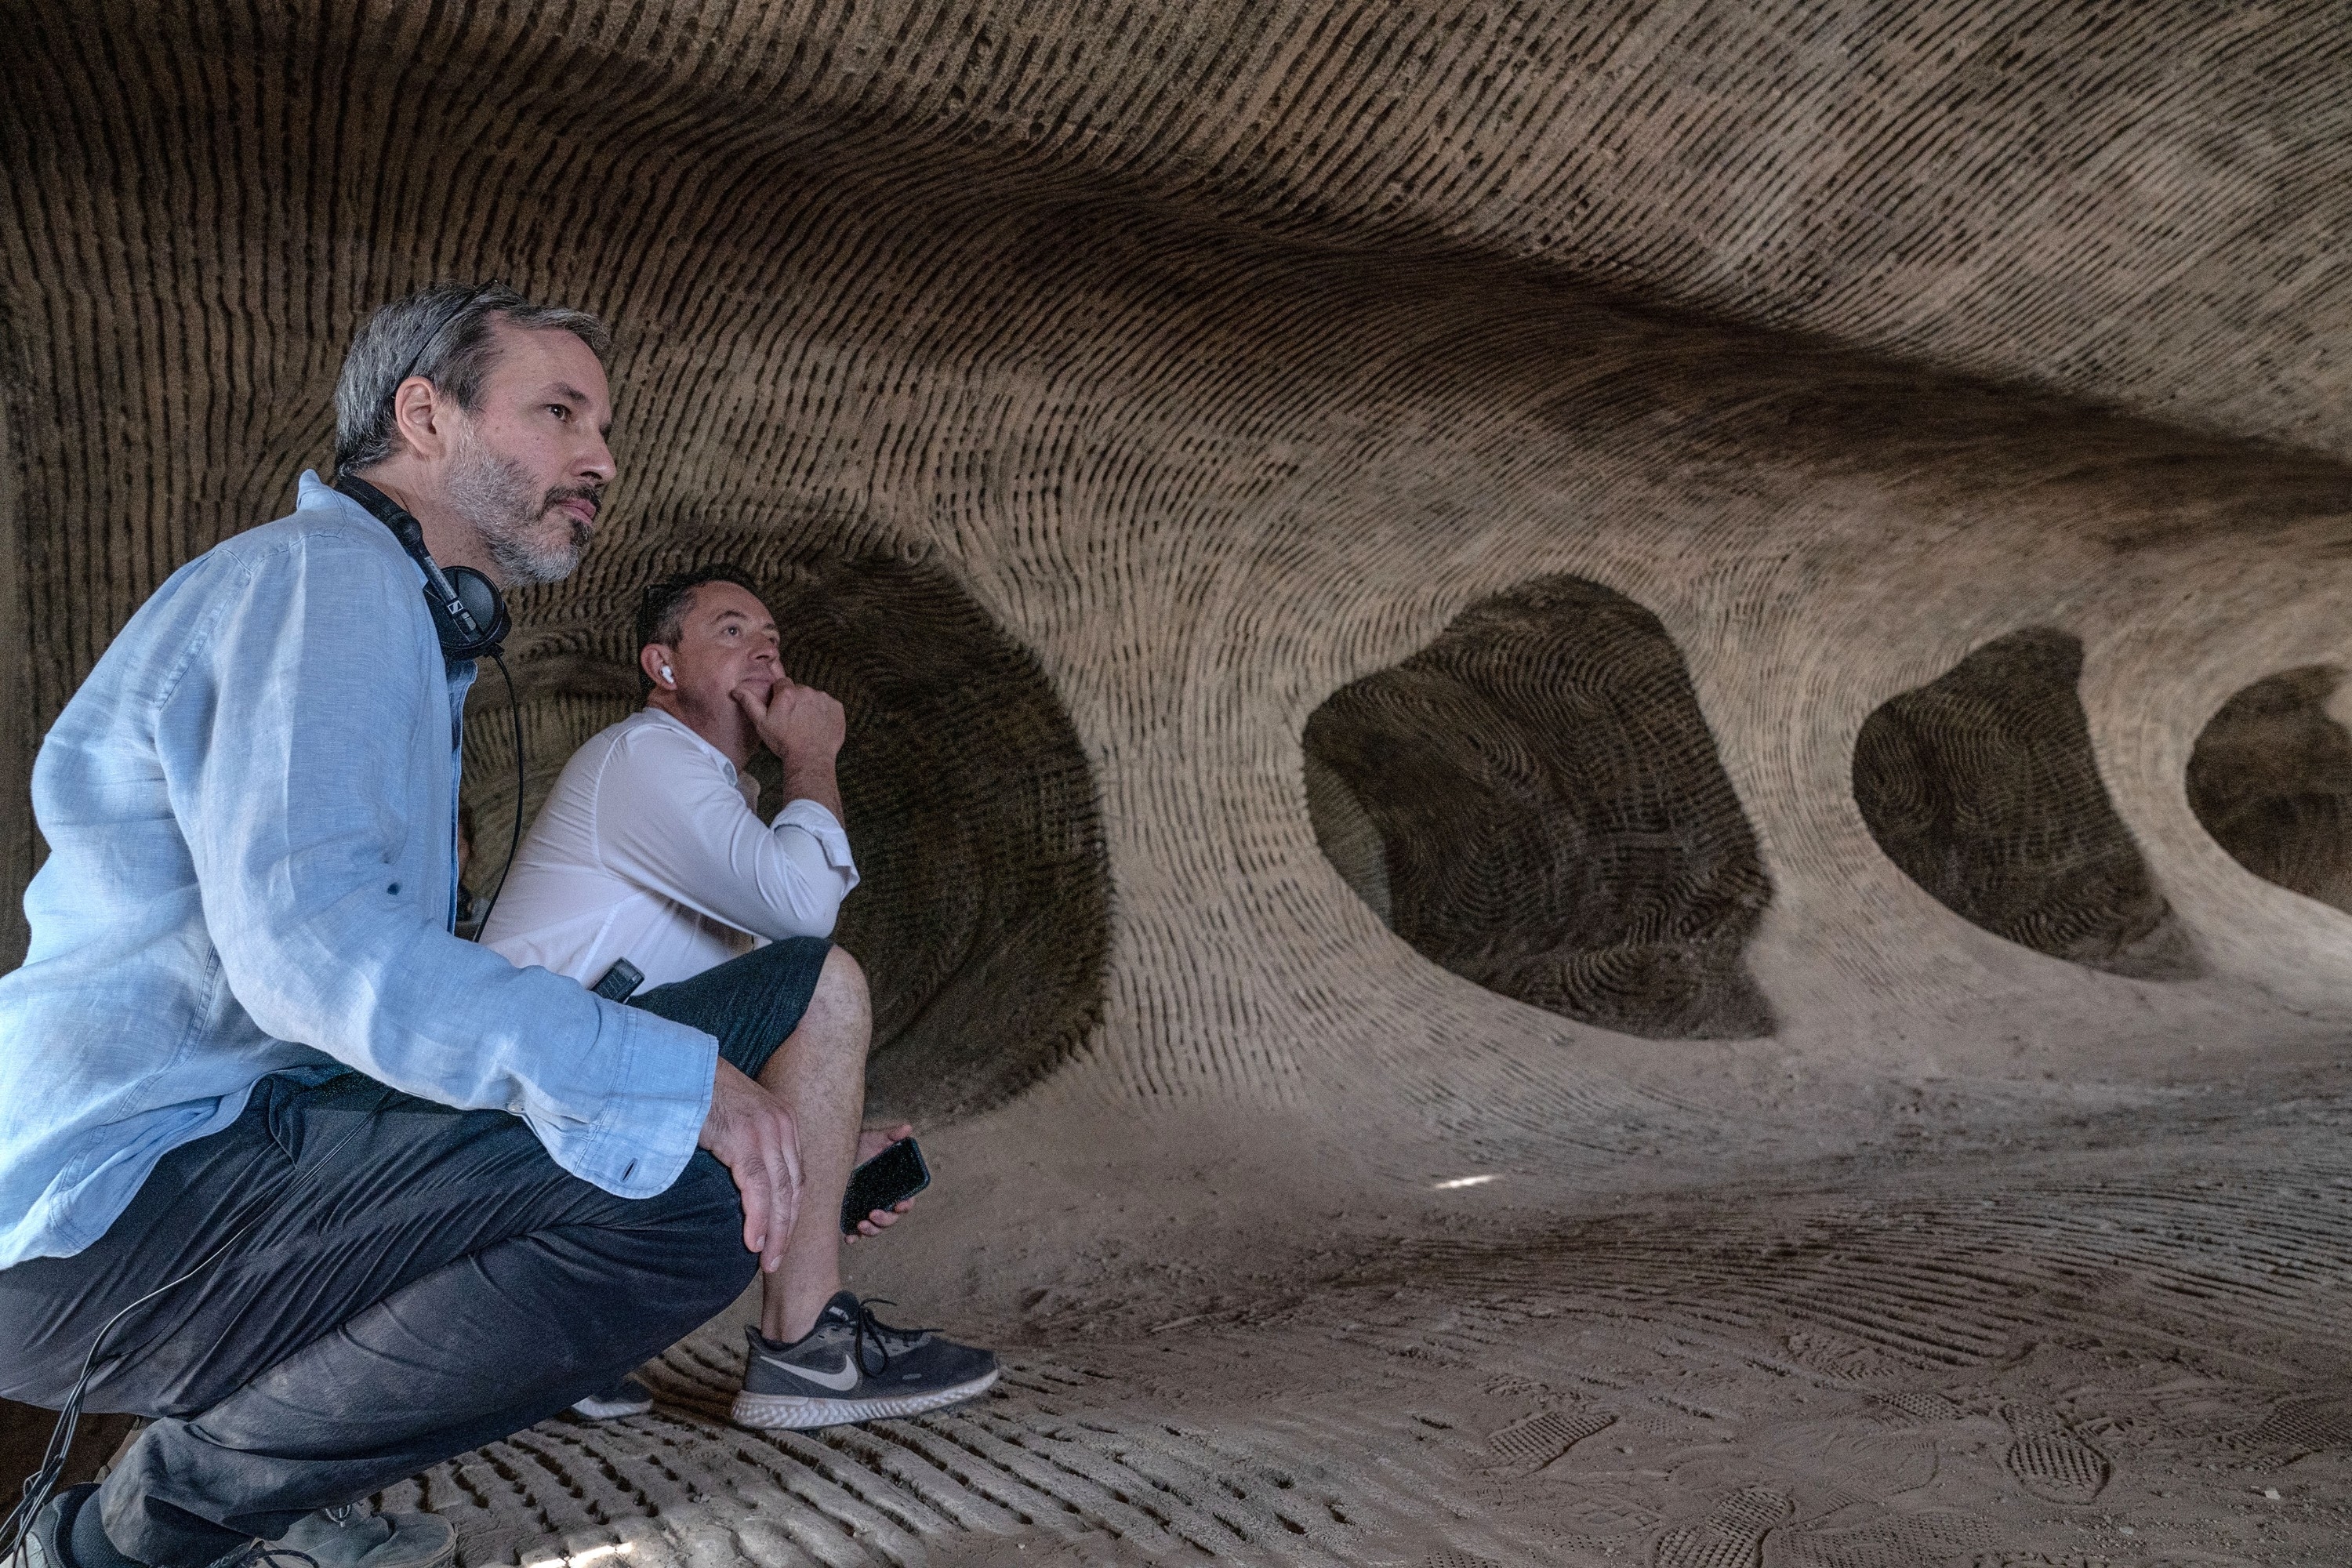 Denis Villeneuve crouching with another man inside a textured tunnel, looking thoughtful. They are on a film set